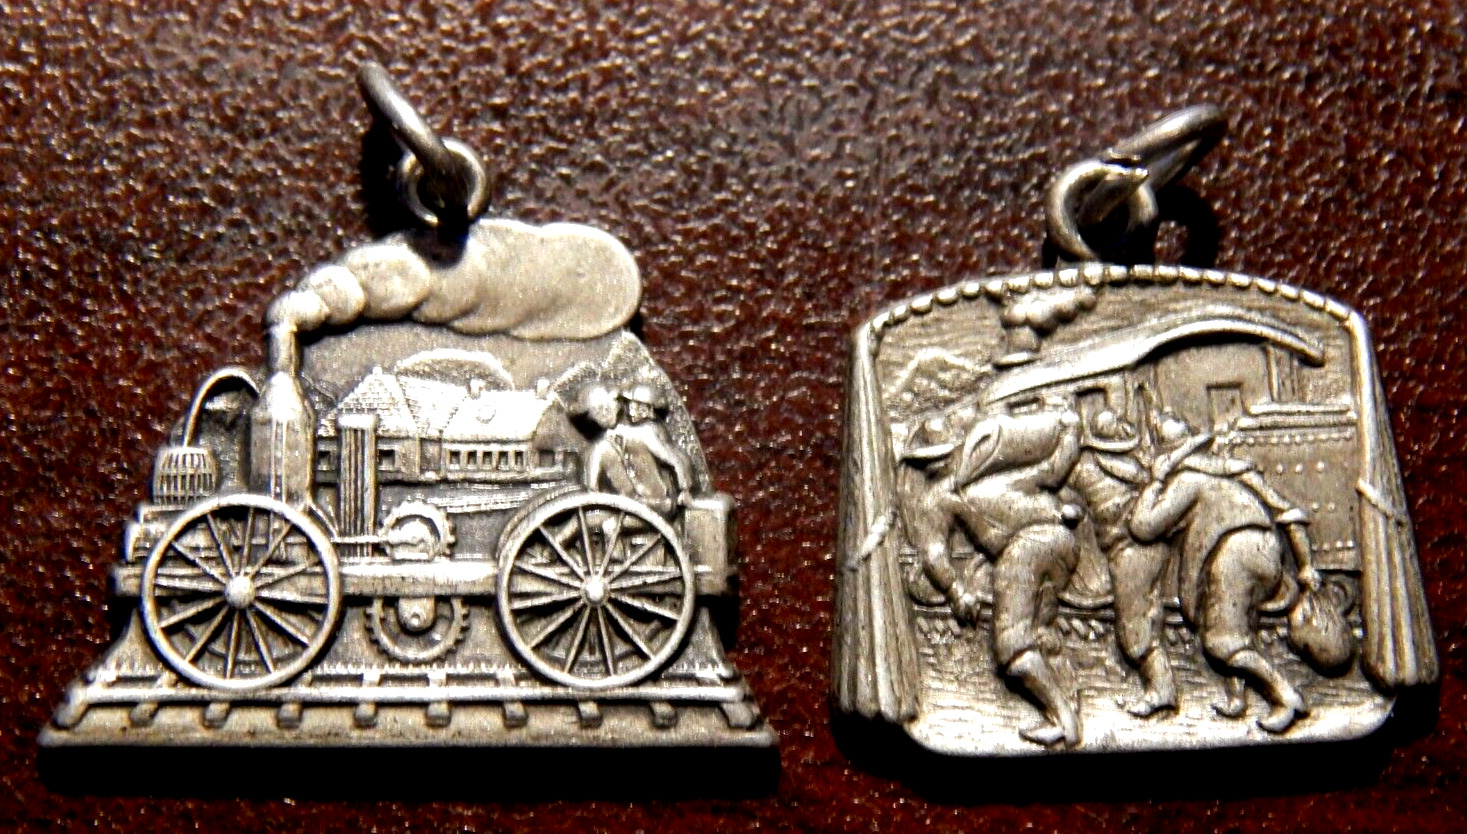 VINTAGE RAILROAD SILVER CHARMS 1ST LOCOMOTIVE 1825 & 1903 GREAT TRAIN ROBBERY 